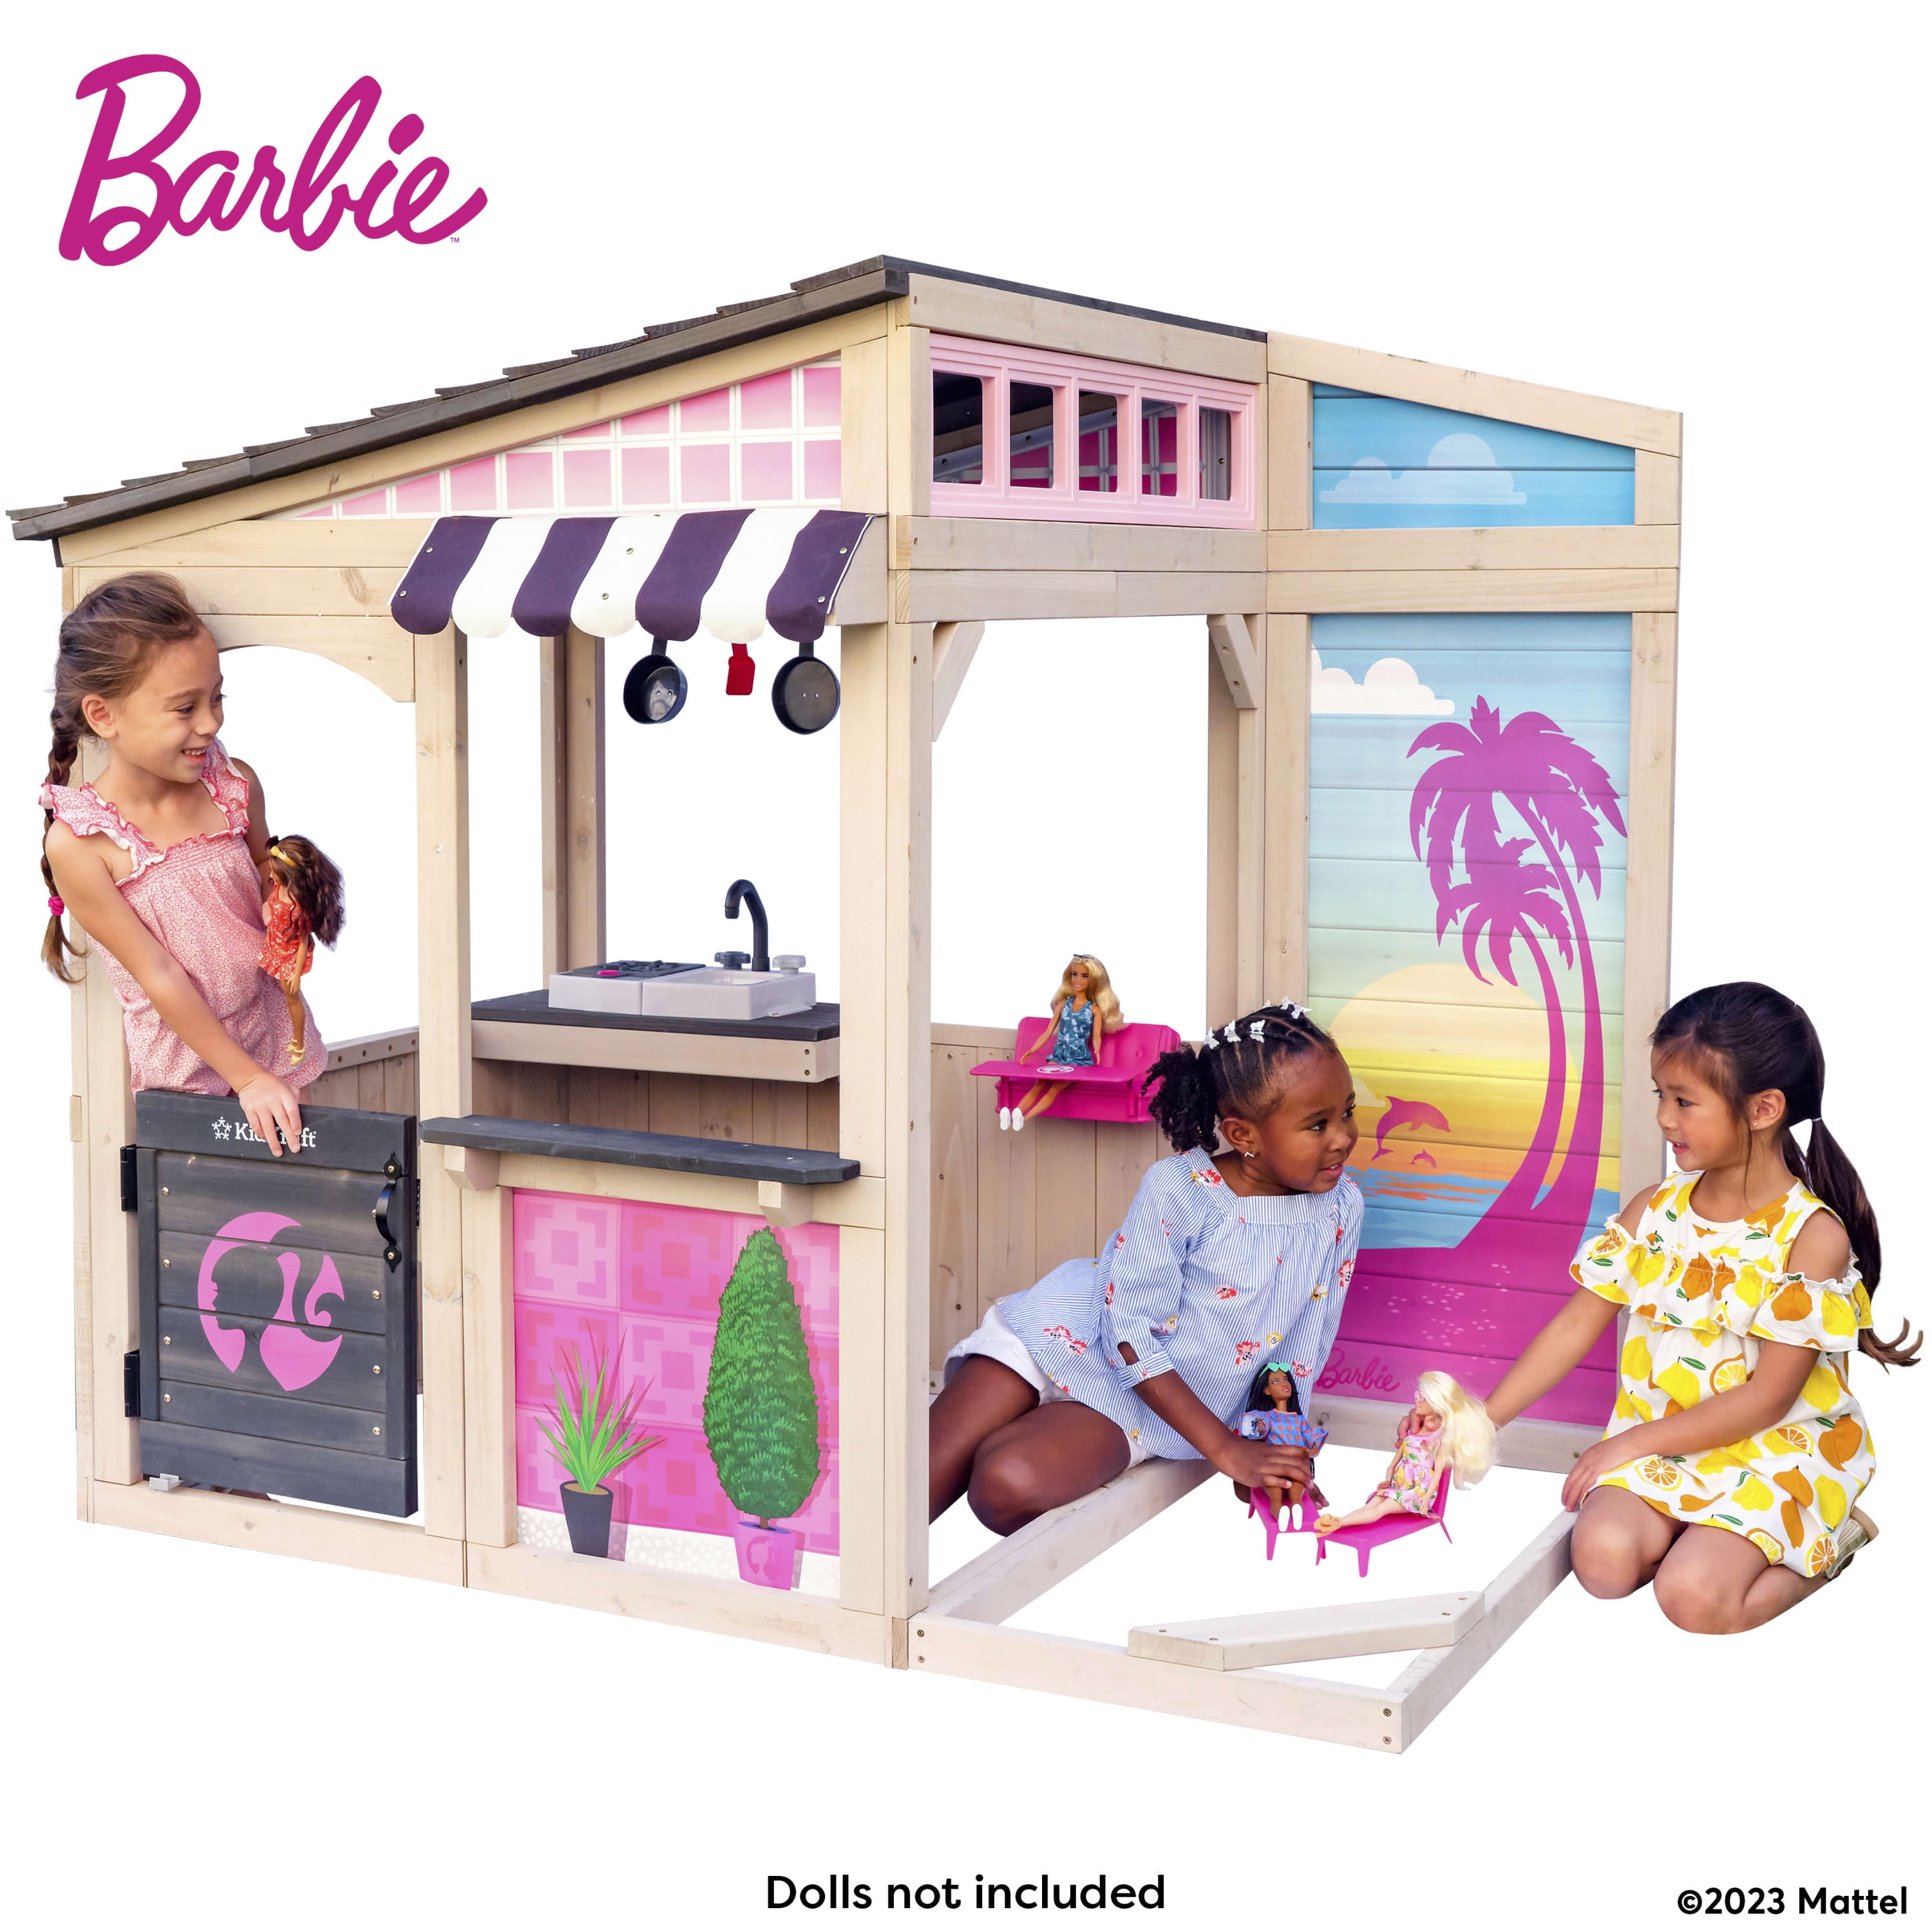 KidKraft Barbie™ Seaside Wooden Outdoor Playhouse with Attachable Doll and Chairs - Walmart.com